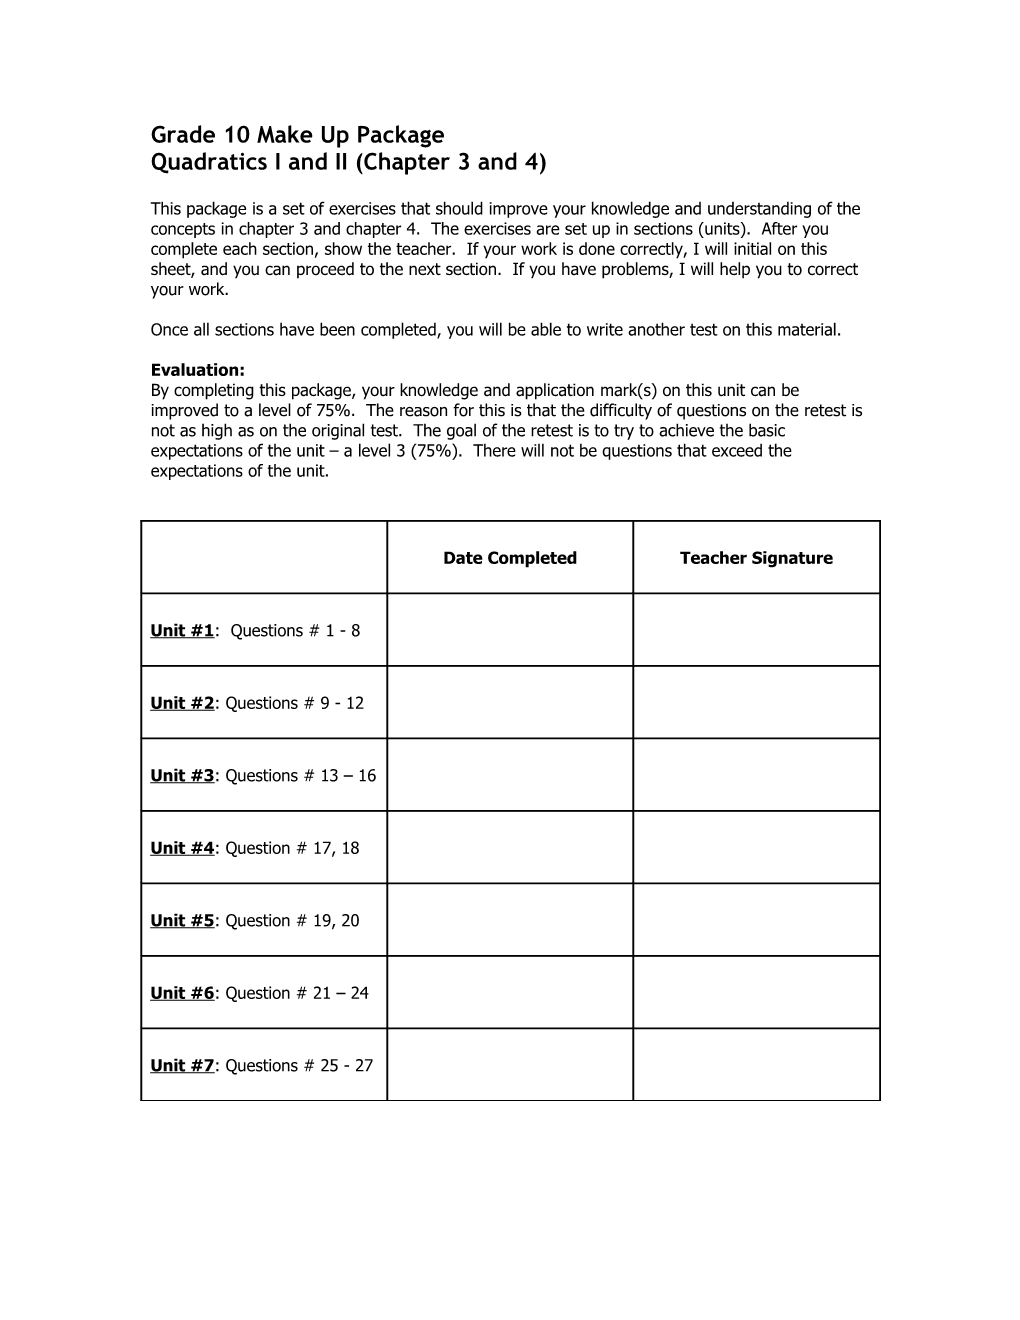 Grade 10 Make up Package Quadratics I and II (Chapter 3 and 4)